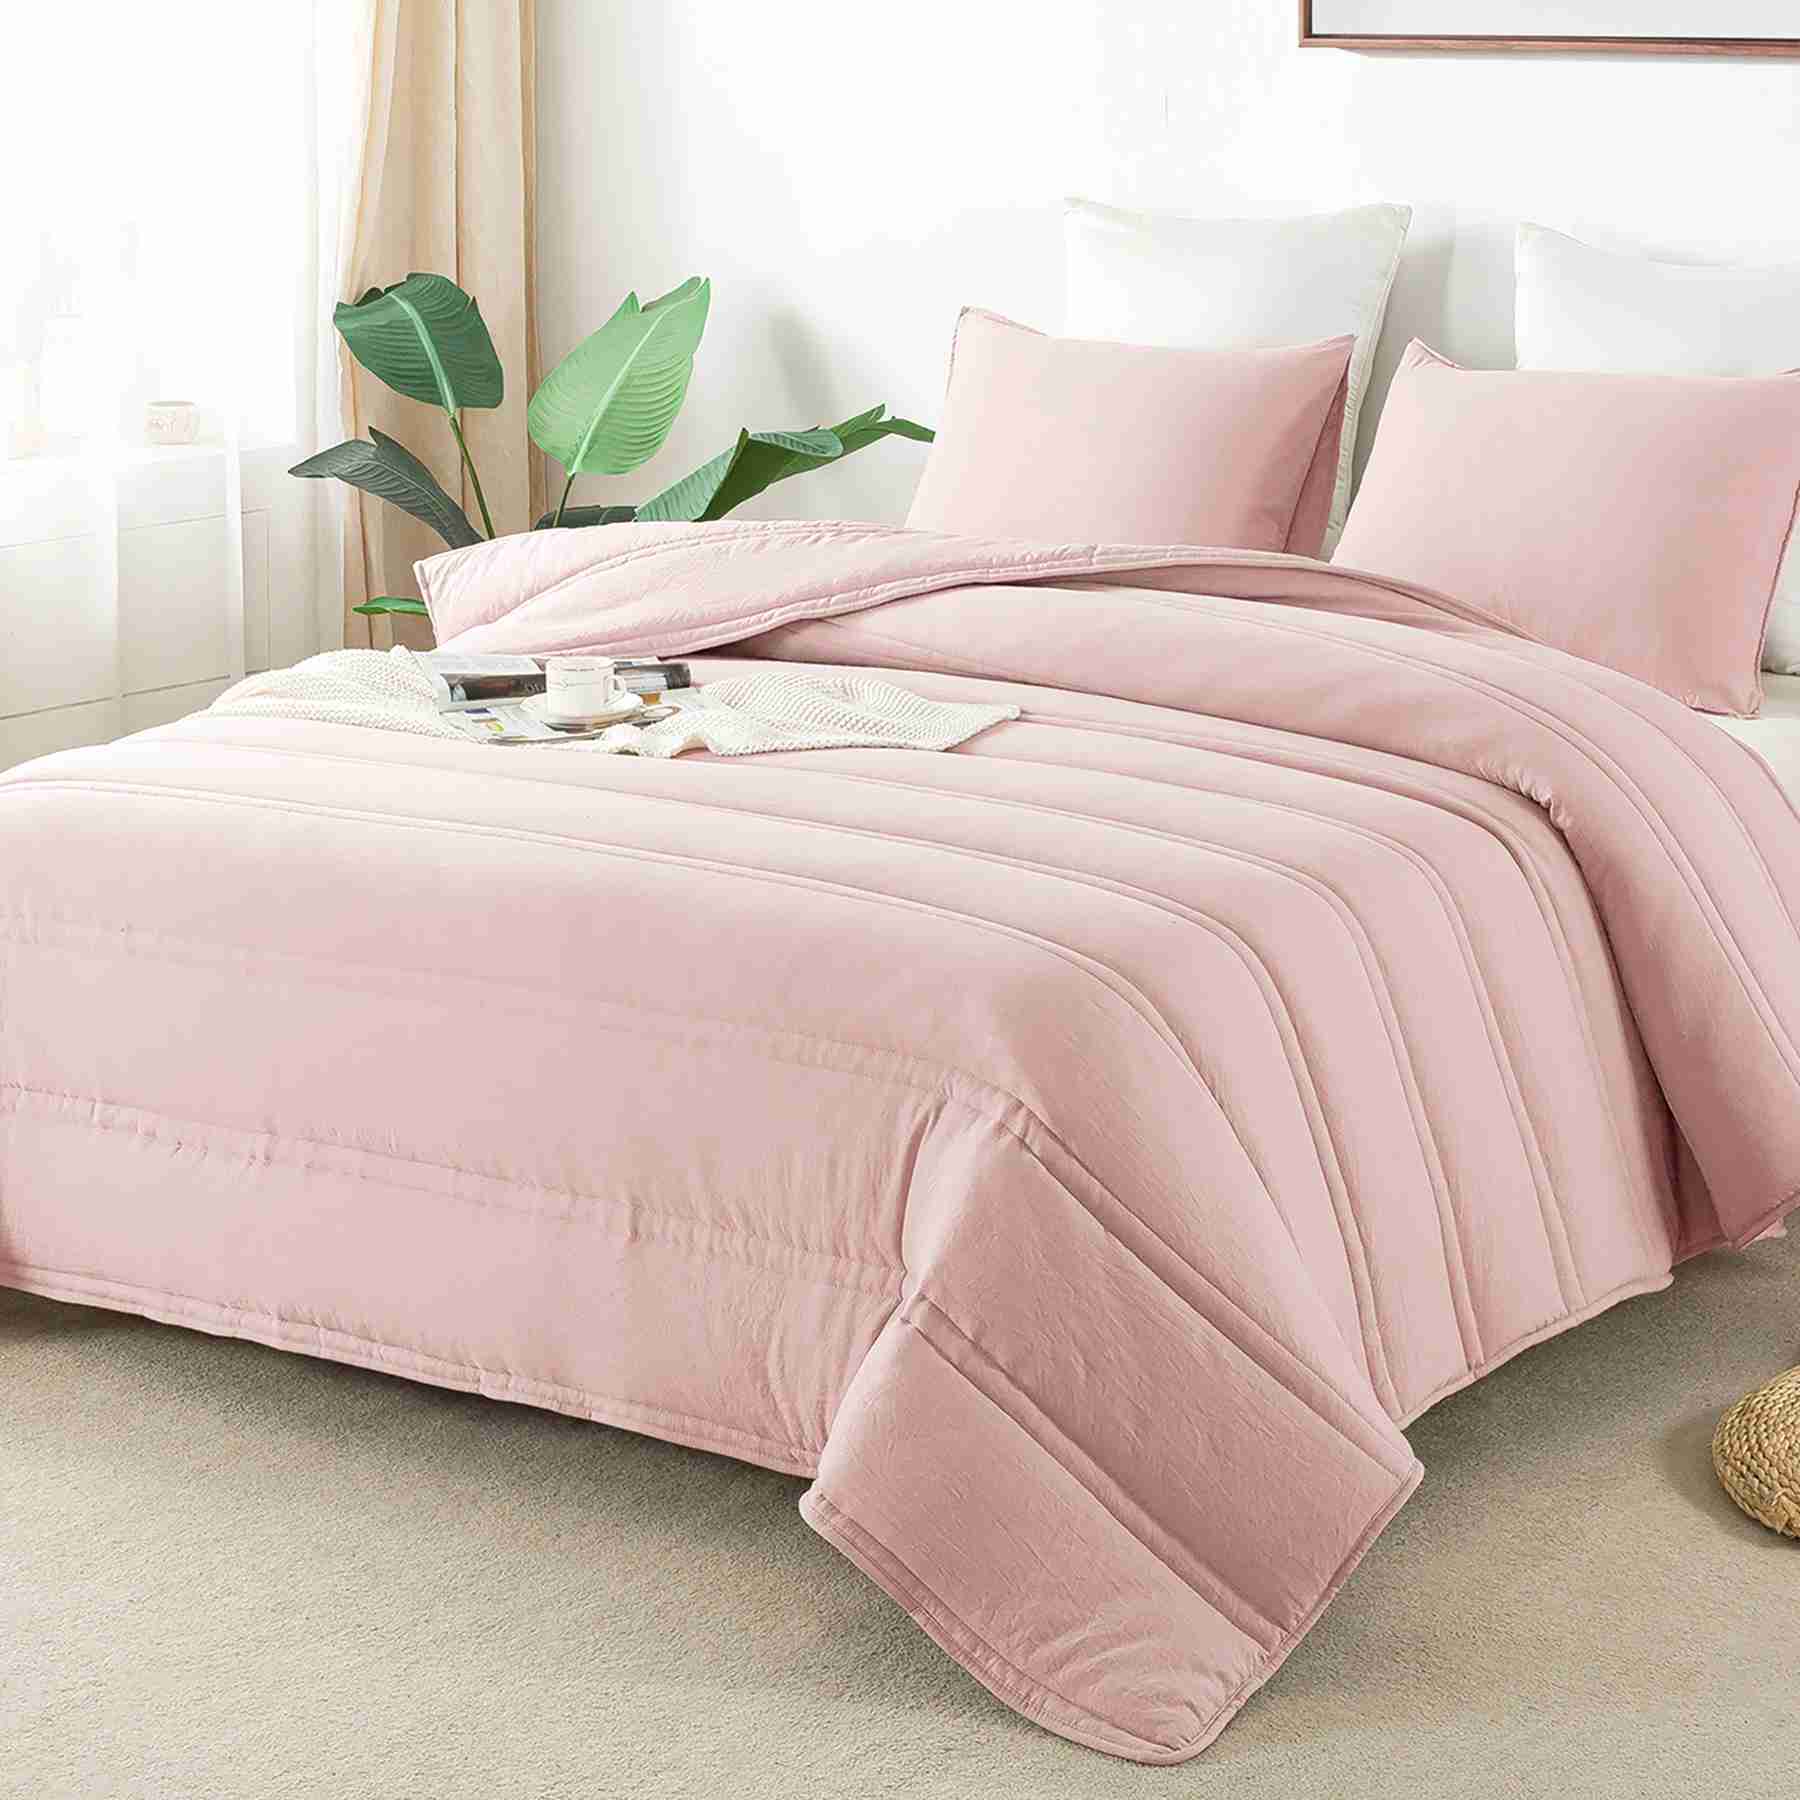 solid-comforter-set for cheap